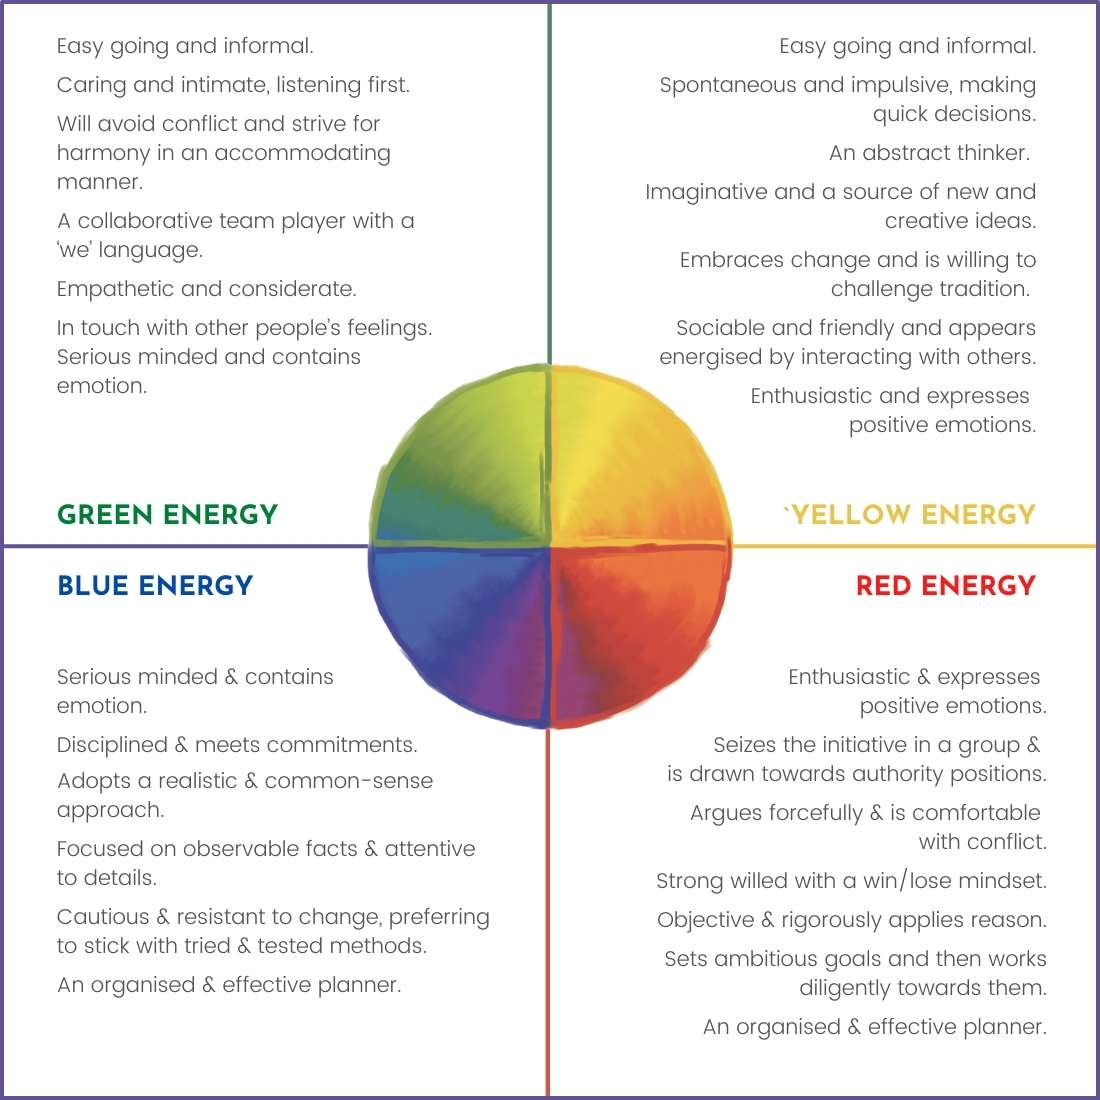 Lumina Learning, The Four Energies and their traits Image